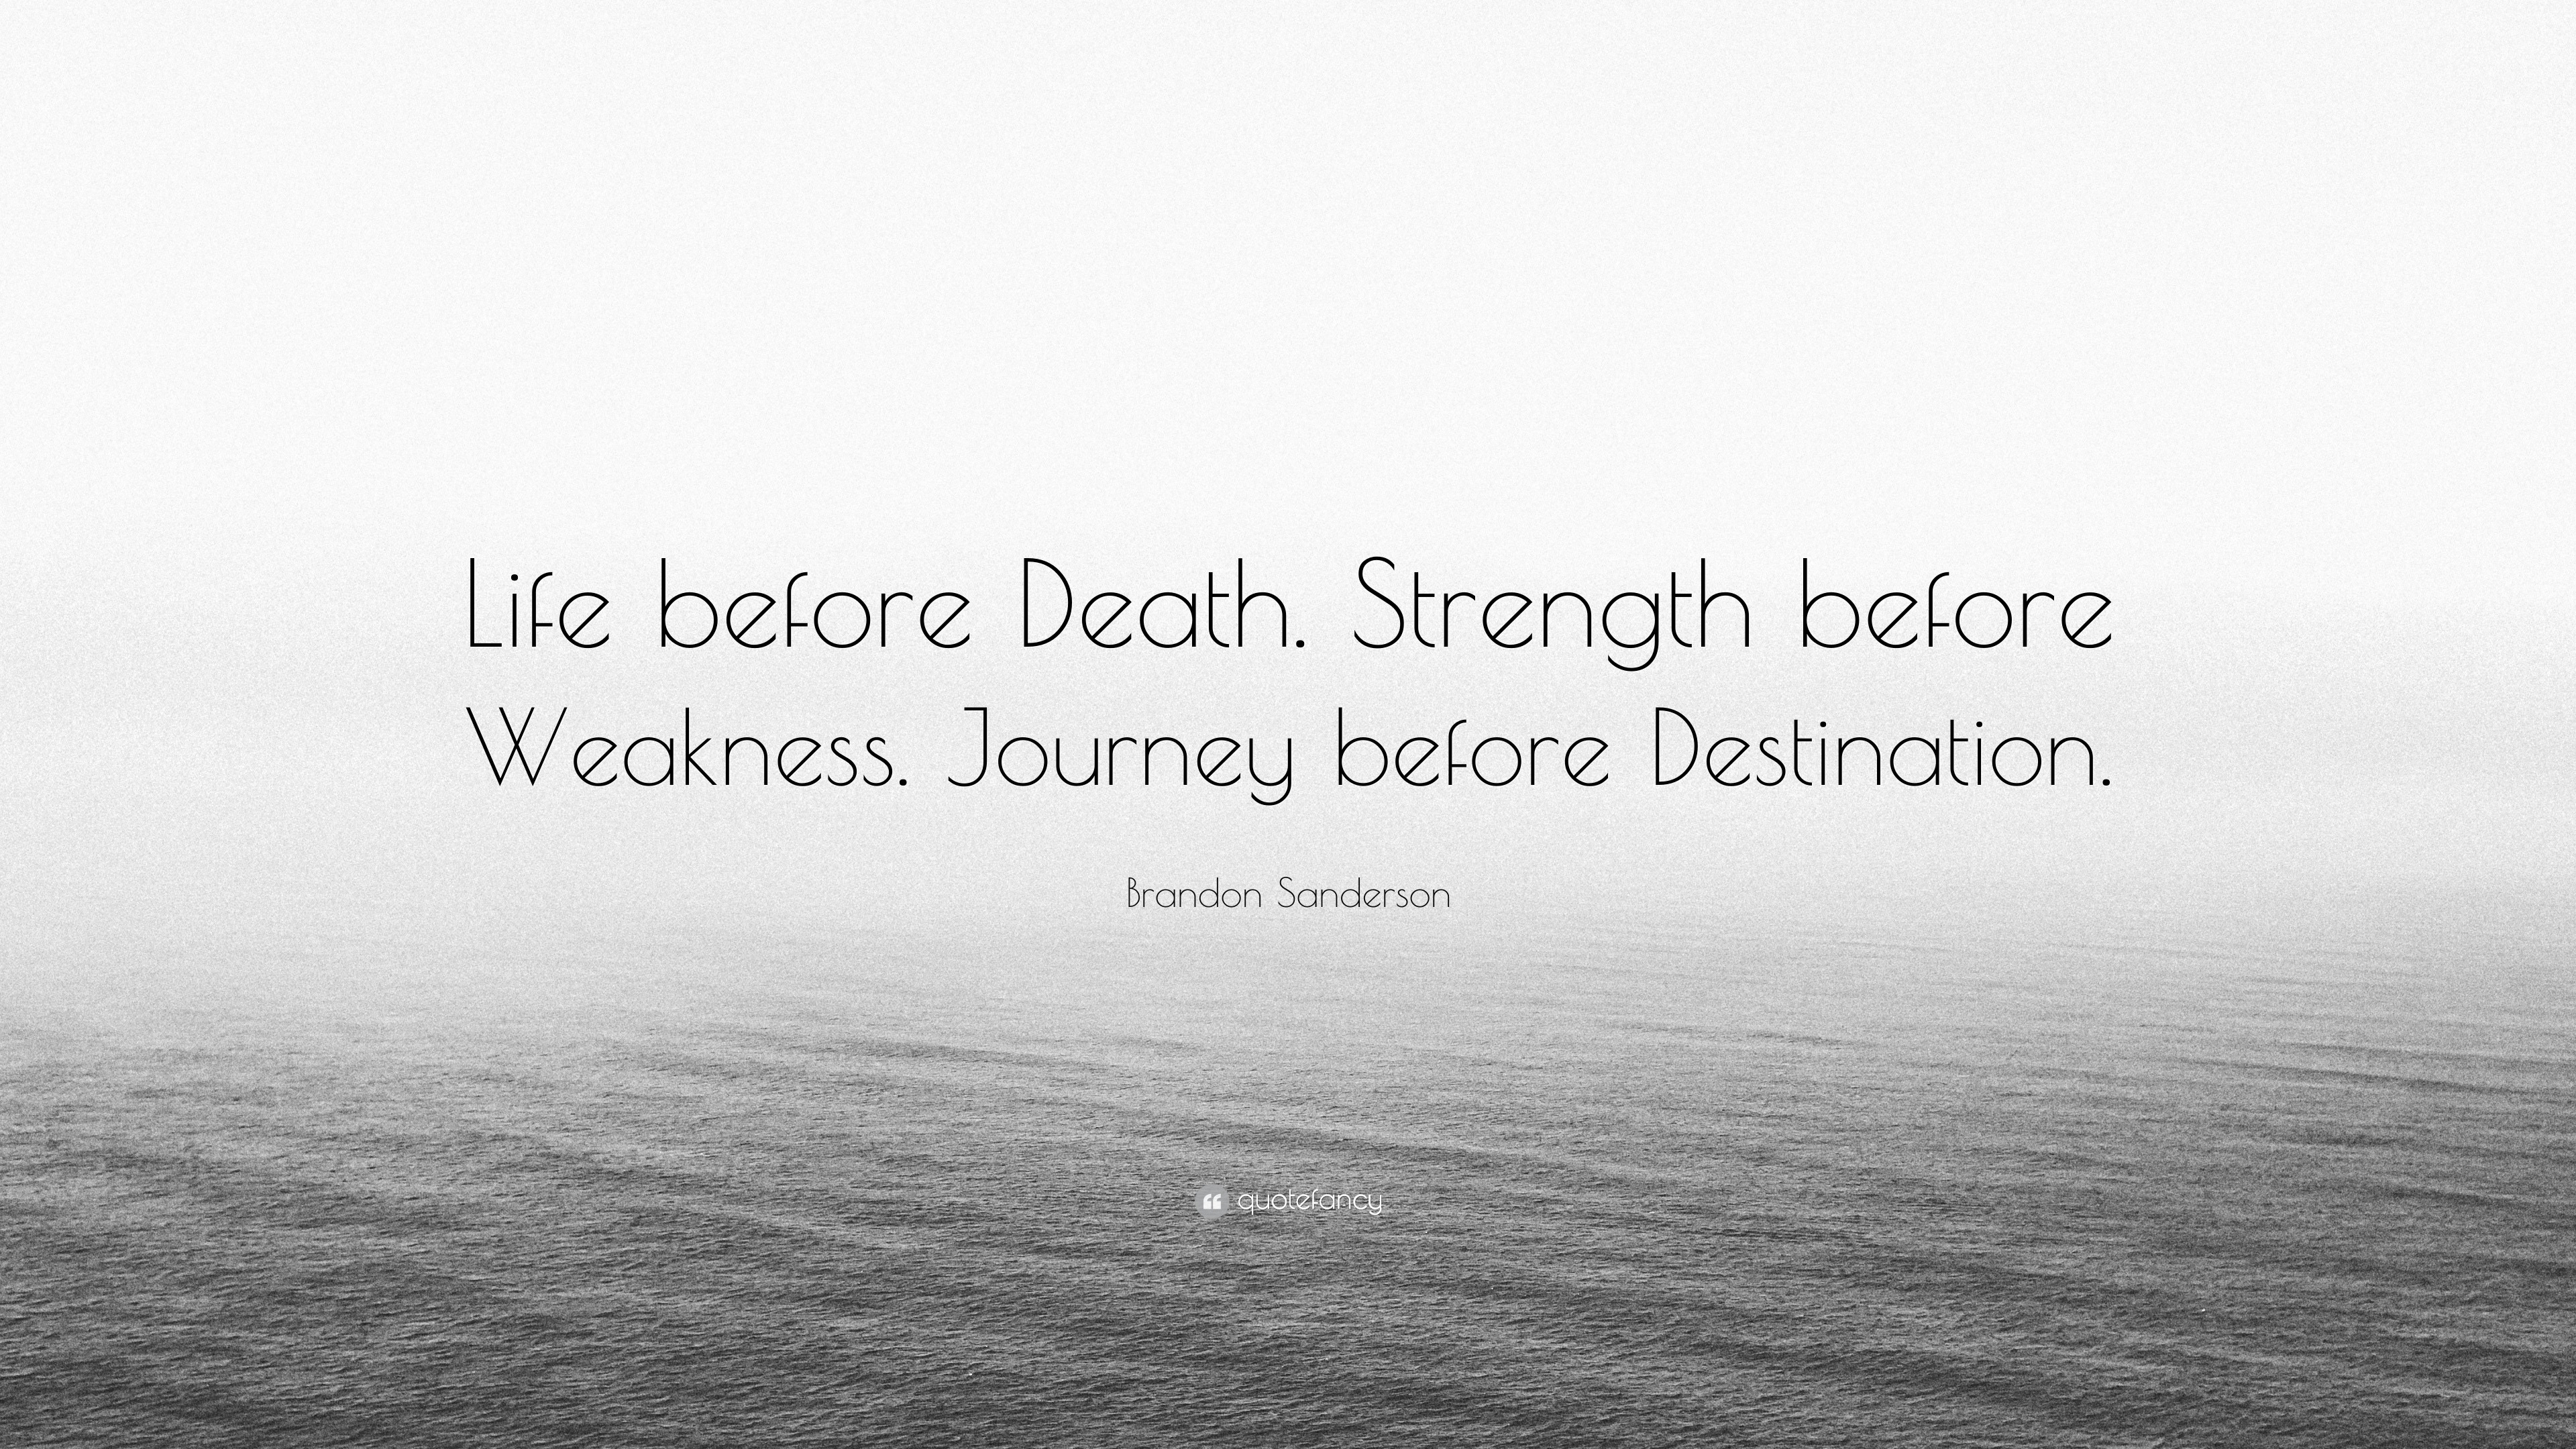 Brandon Sanderson Quote “Life before Death Strength before Weakness Journey before Destination